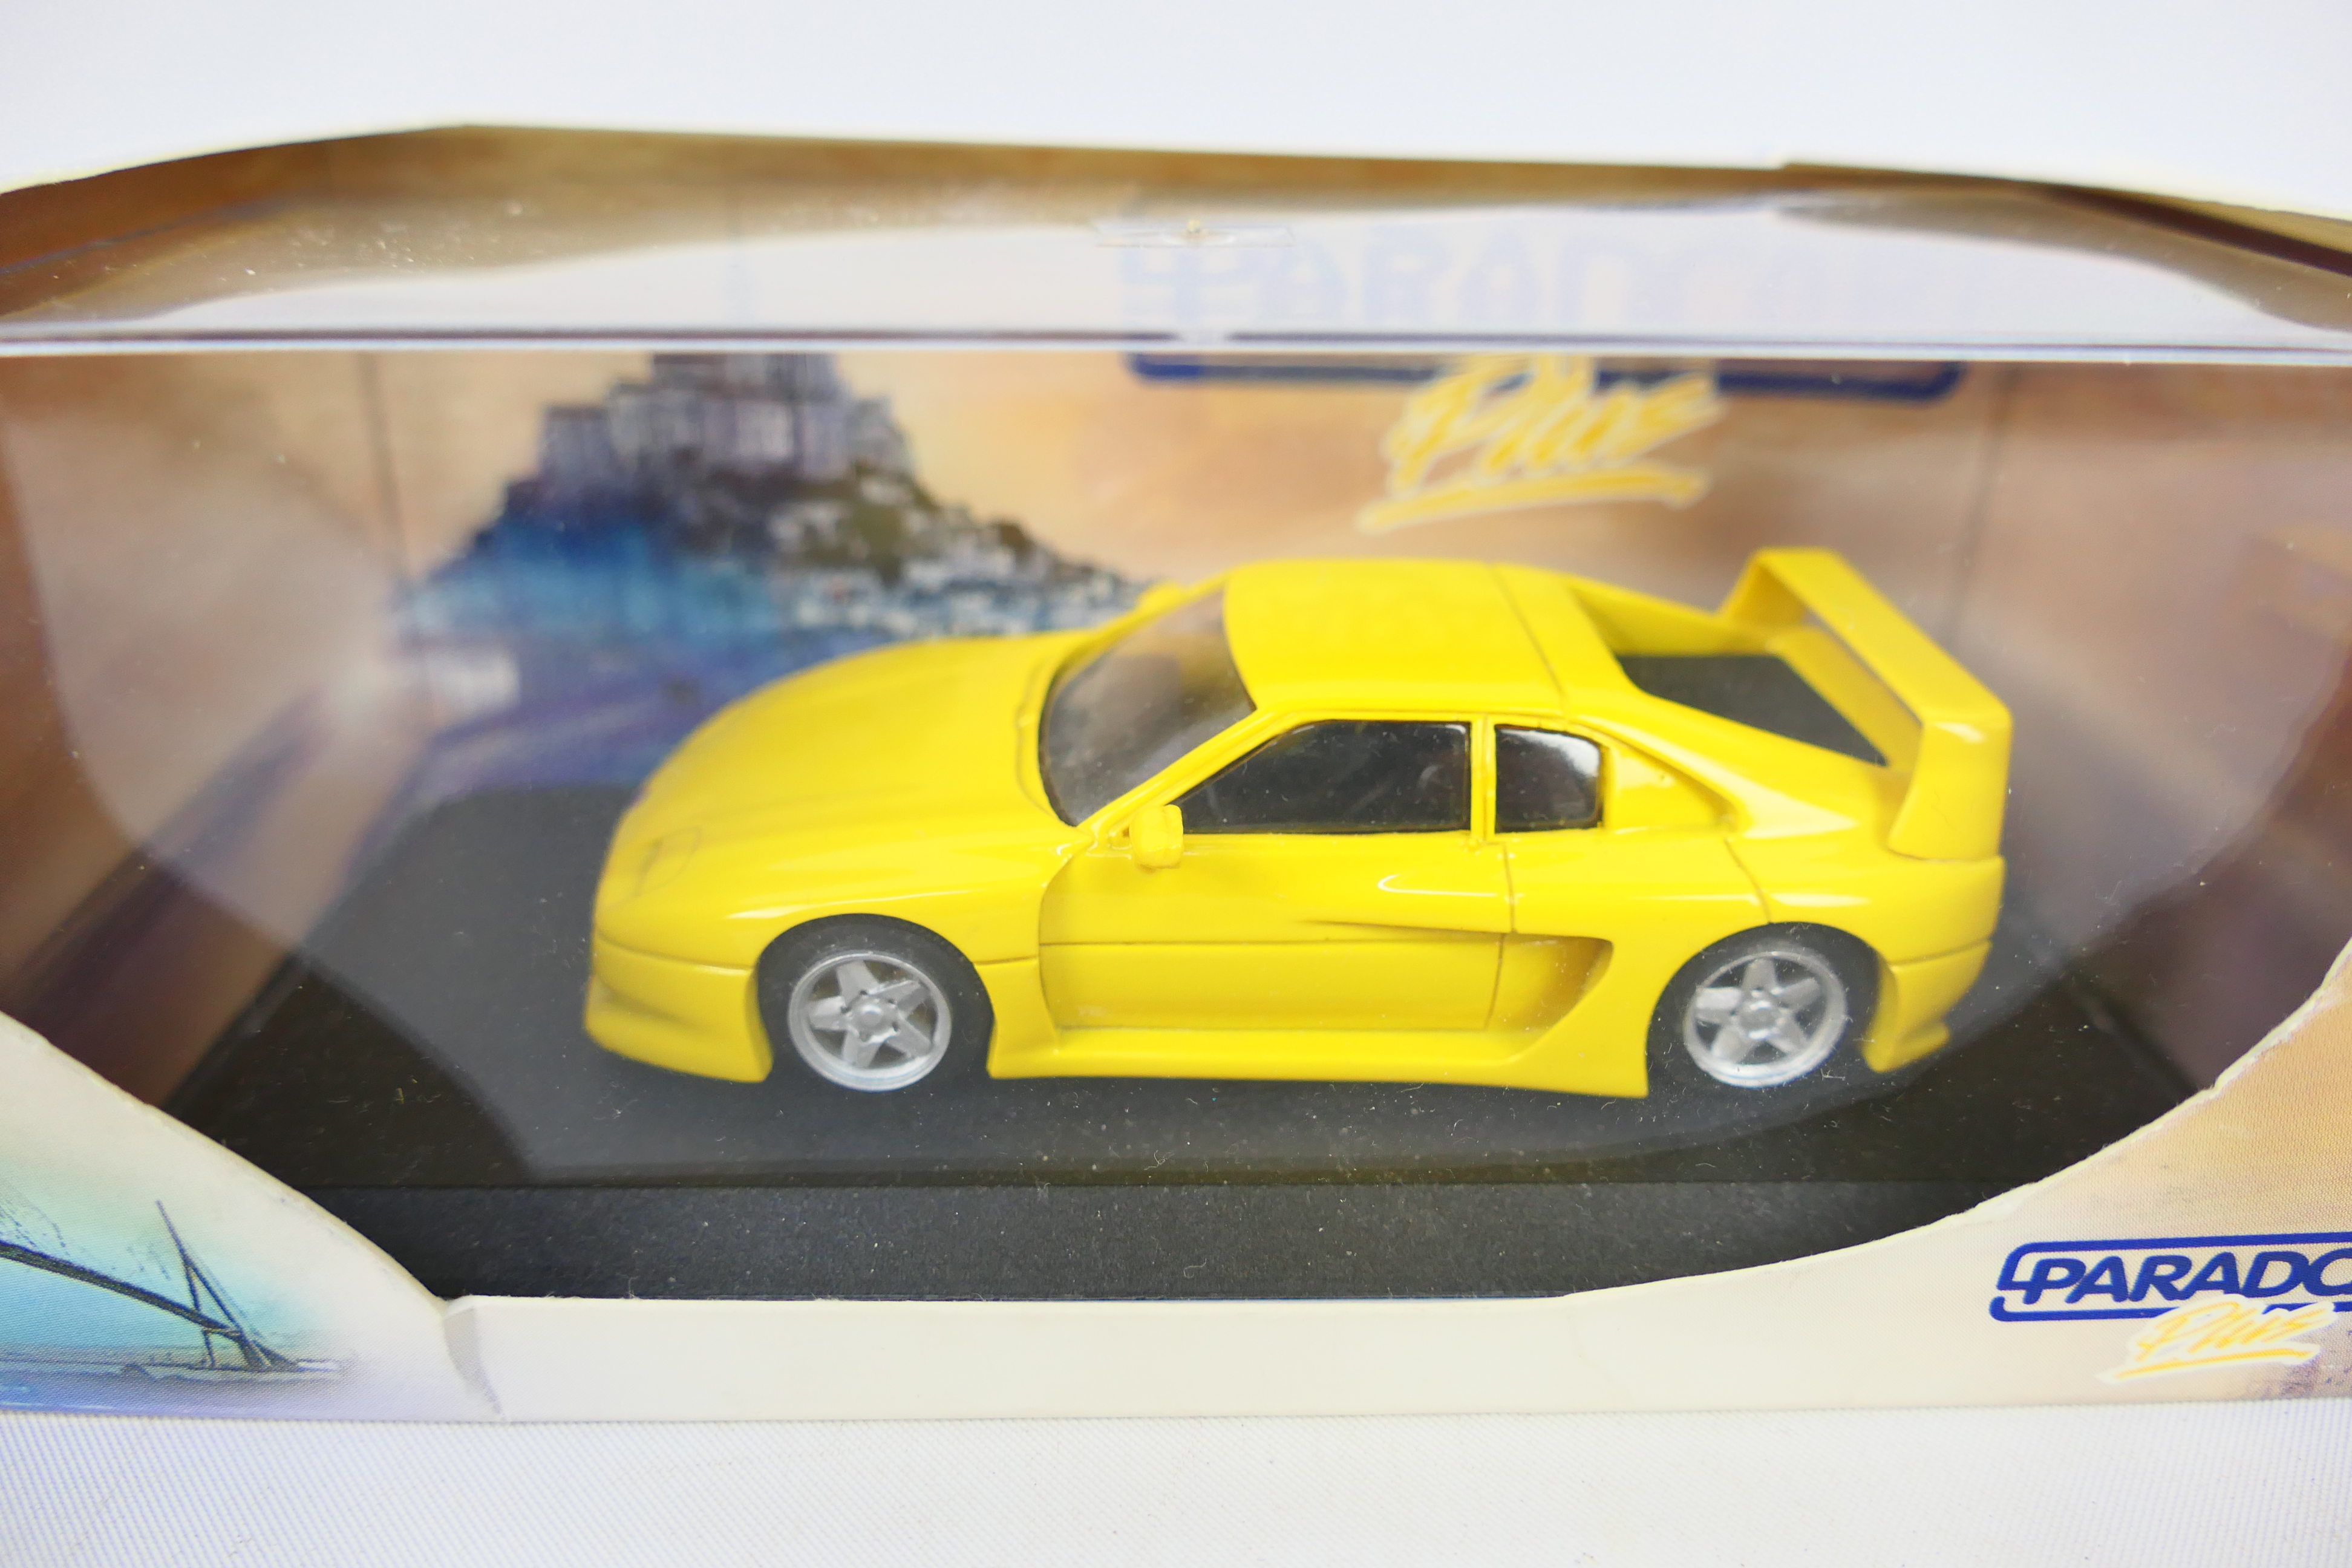 Paradcar - 2 x rare French Venturi models in 1:43 scale resin, - Image 5 of 10